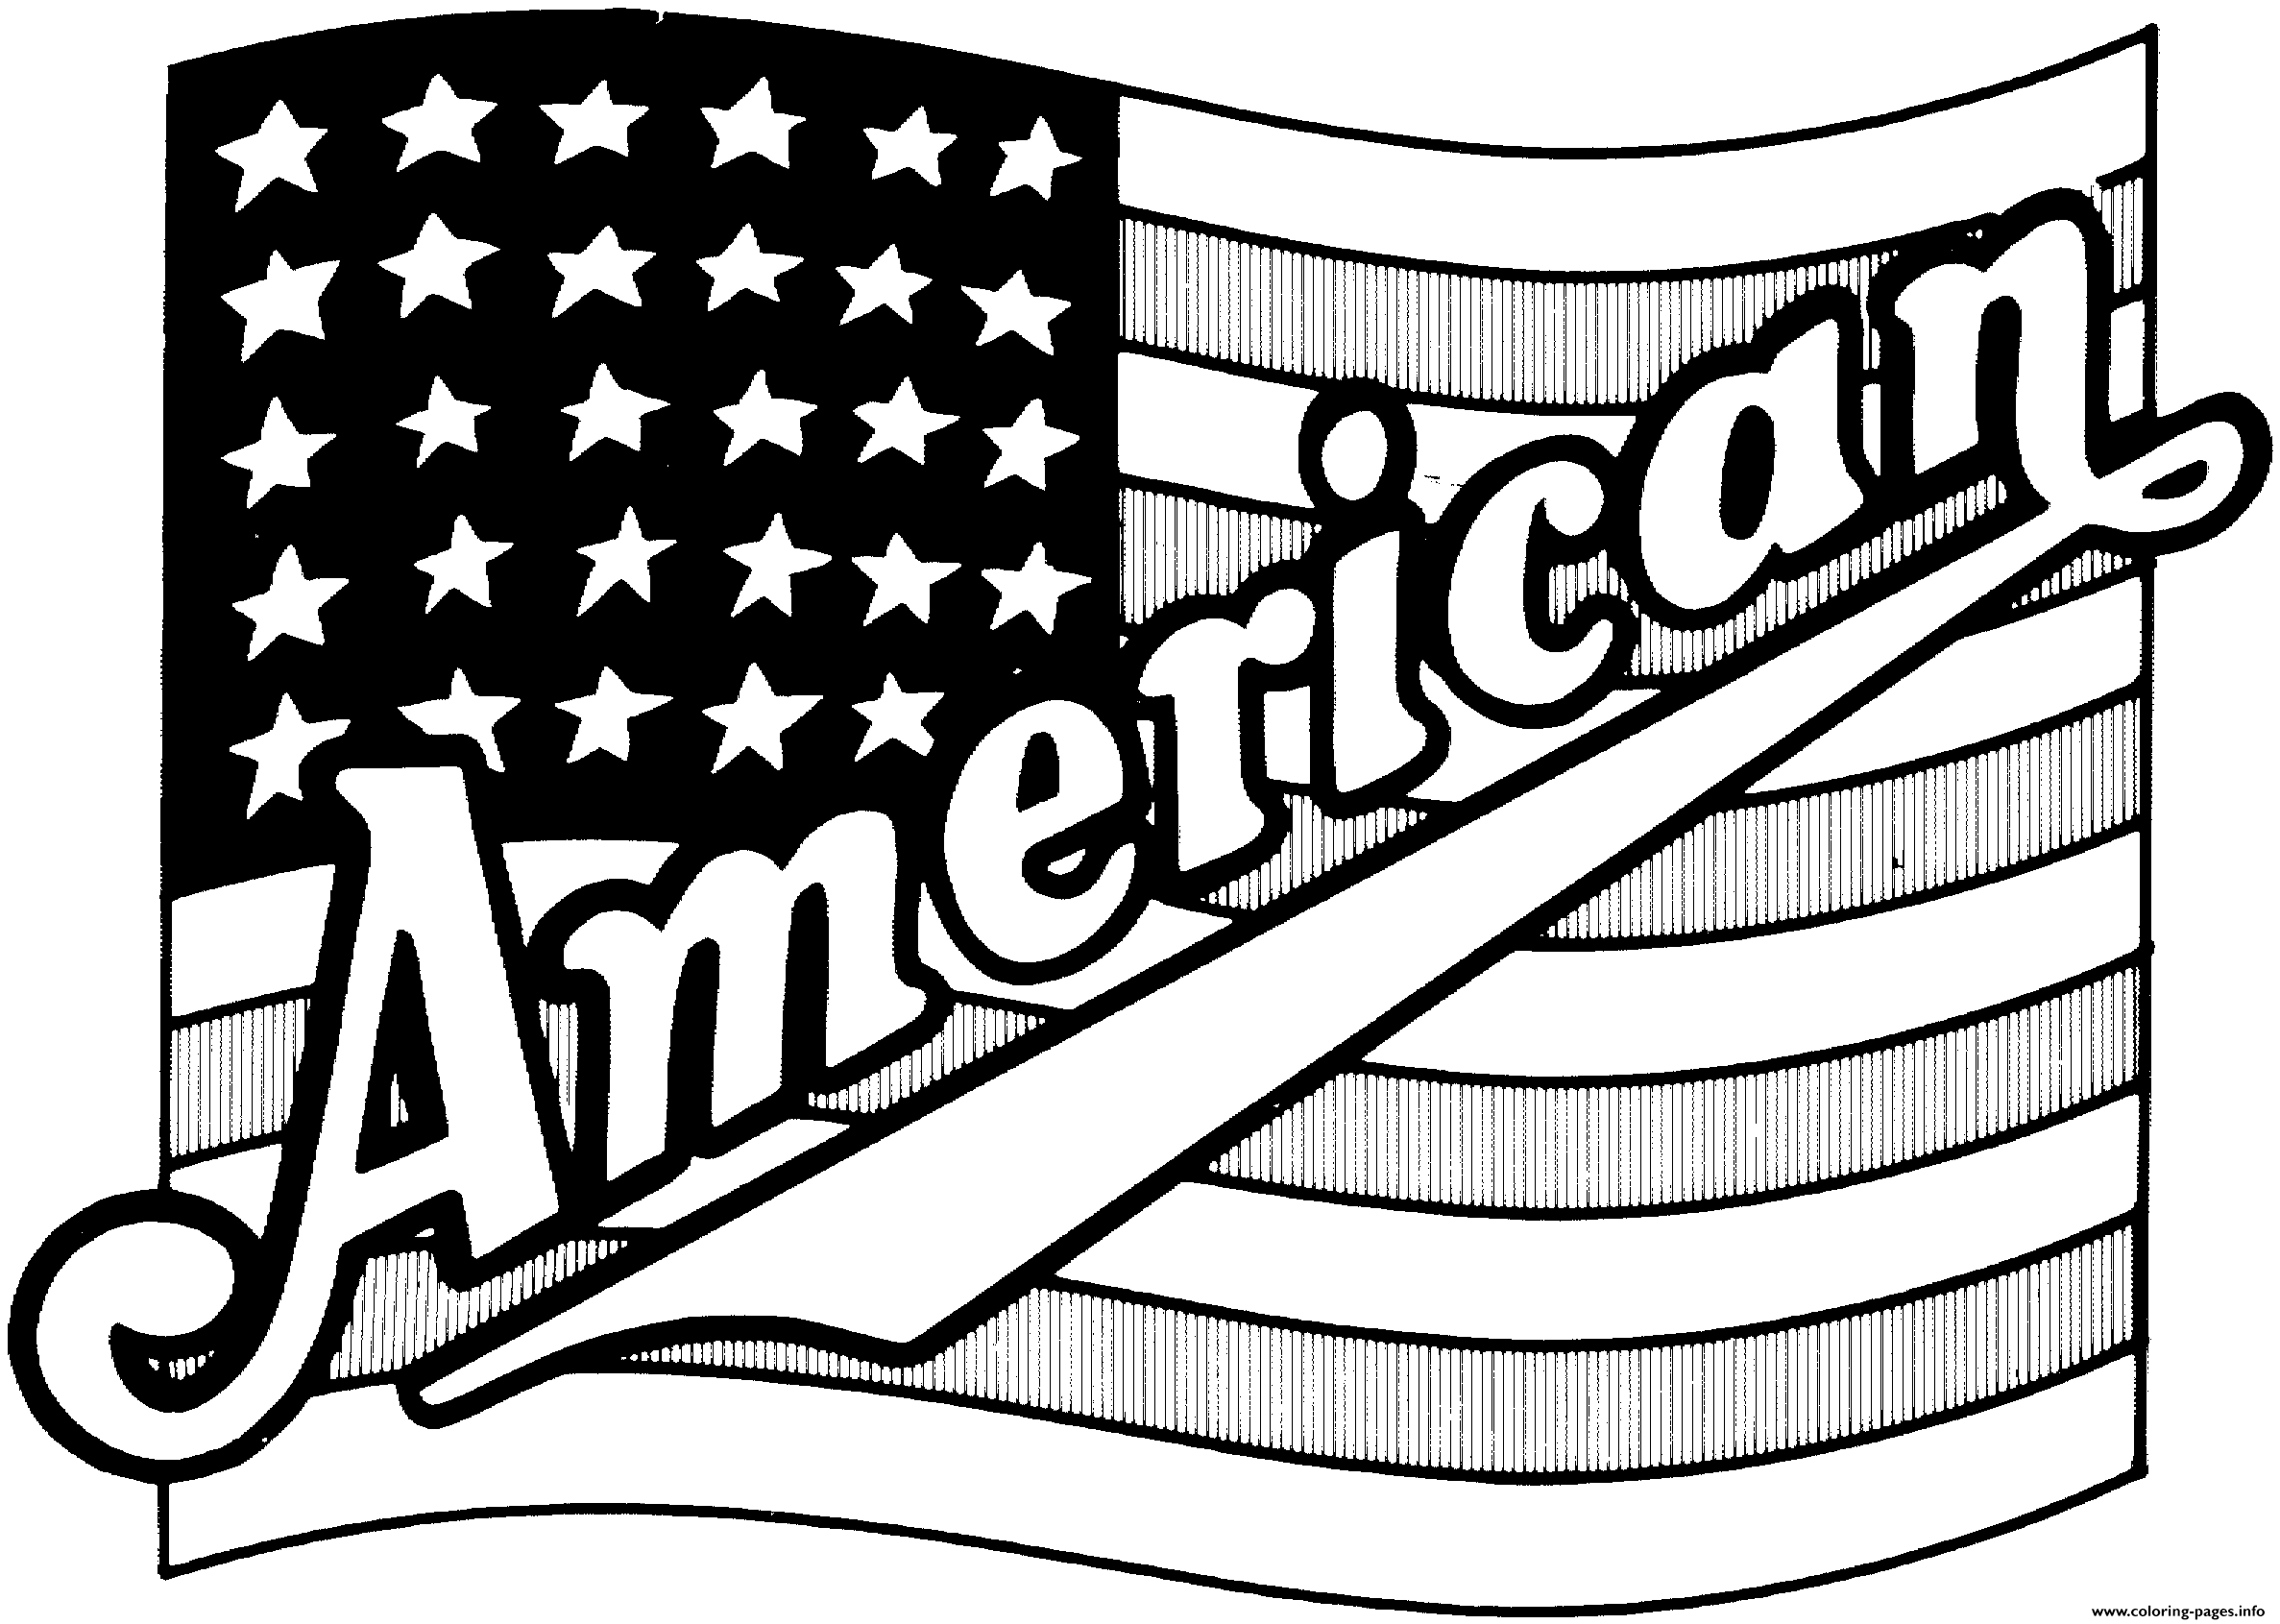 printable-american-flag-images-free-download-on-clipartmag